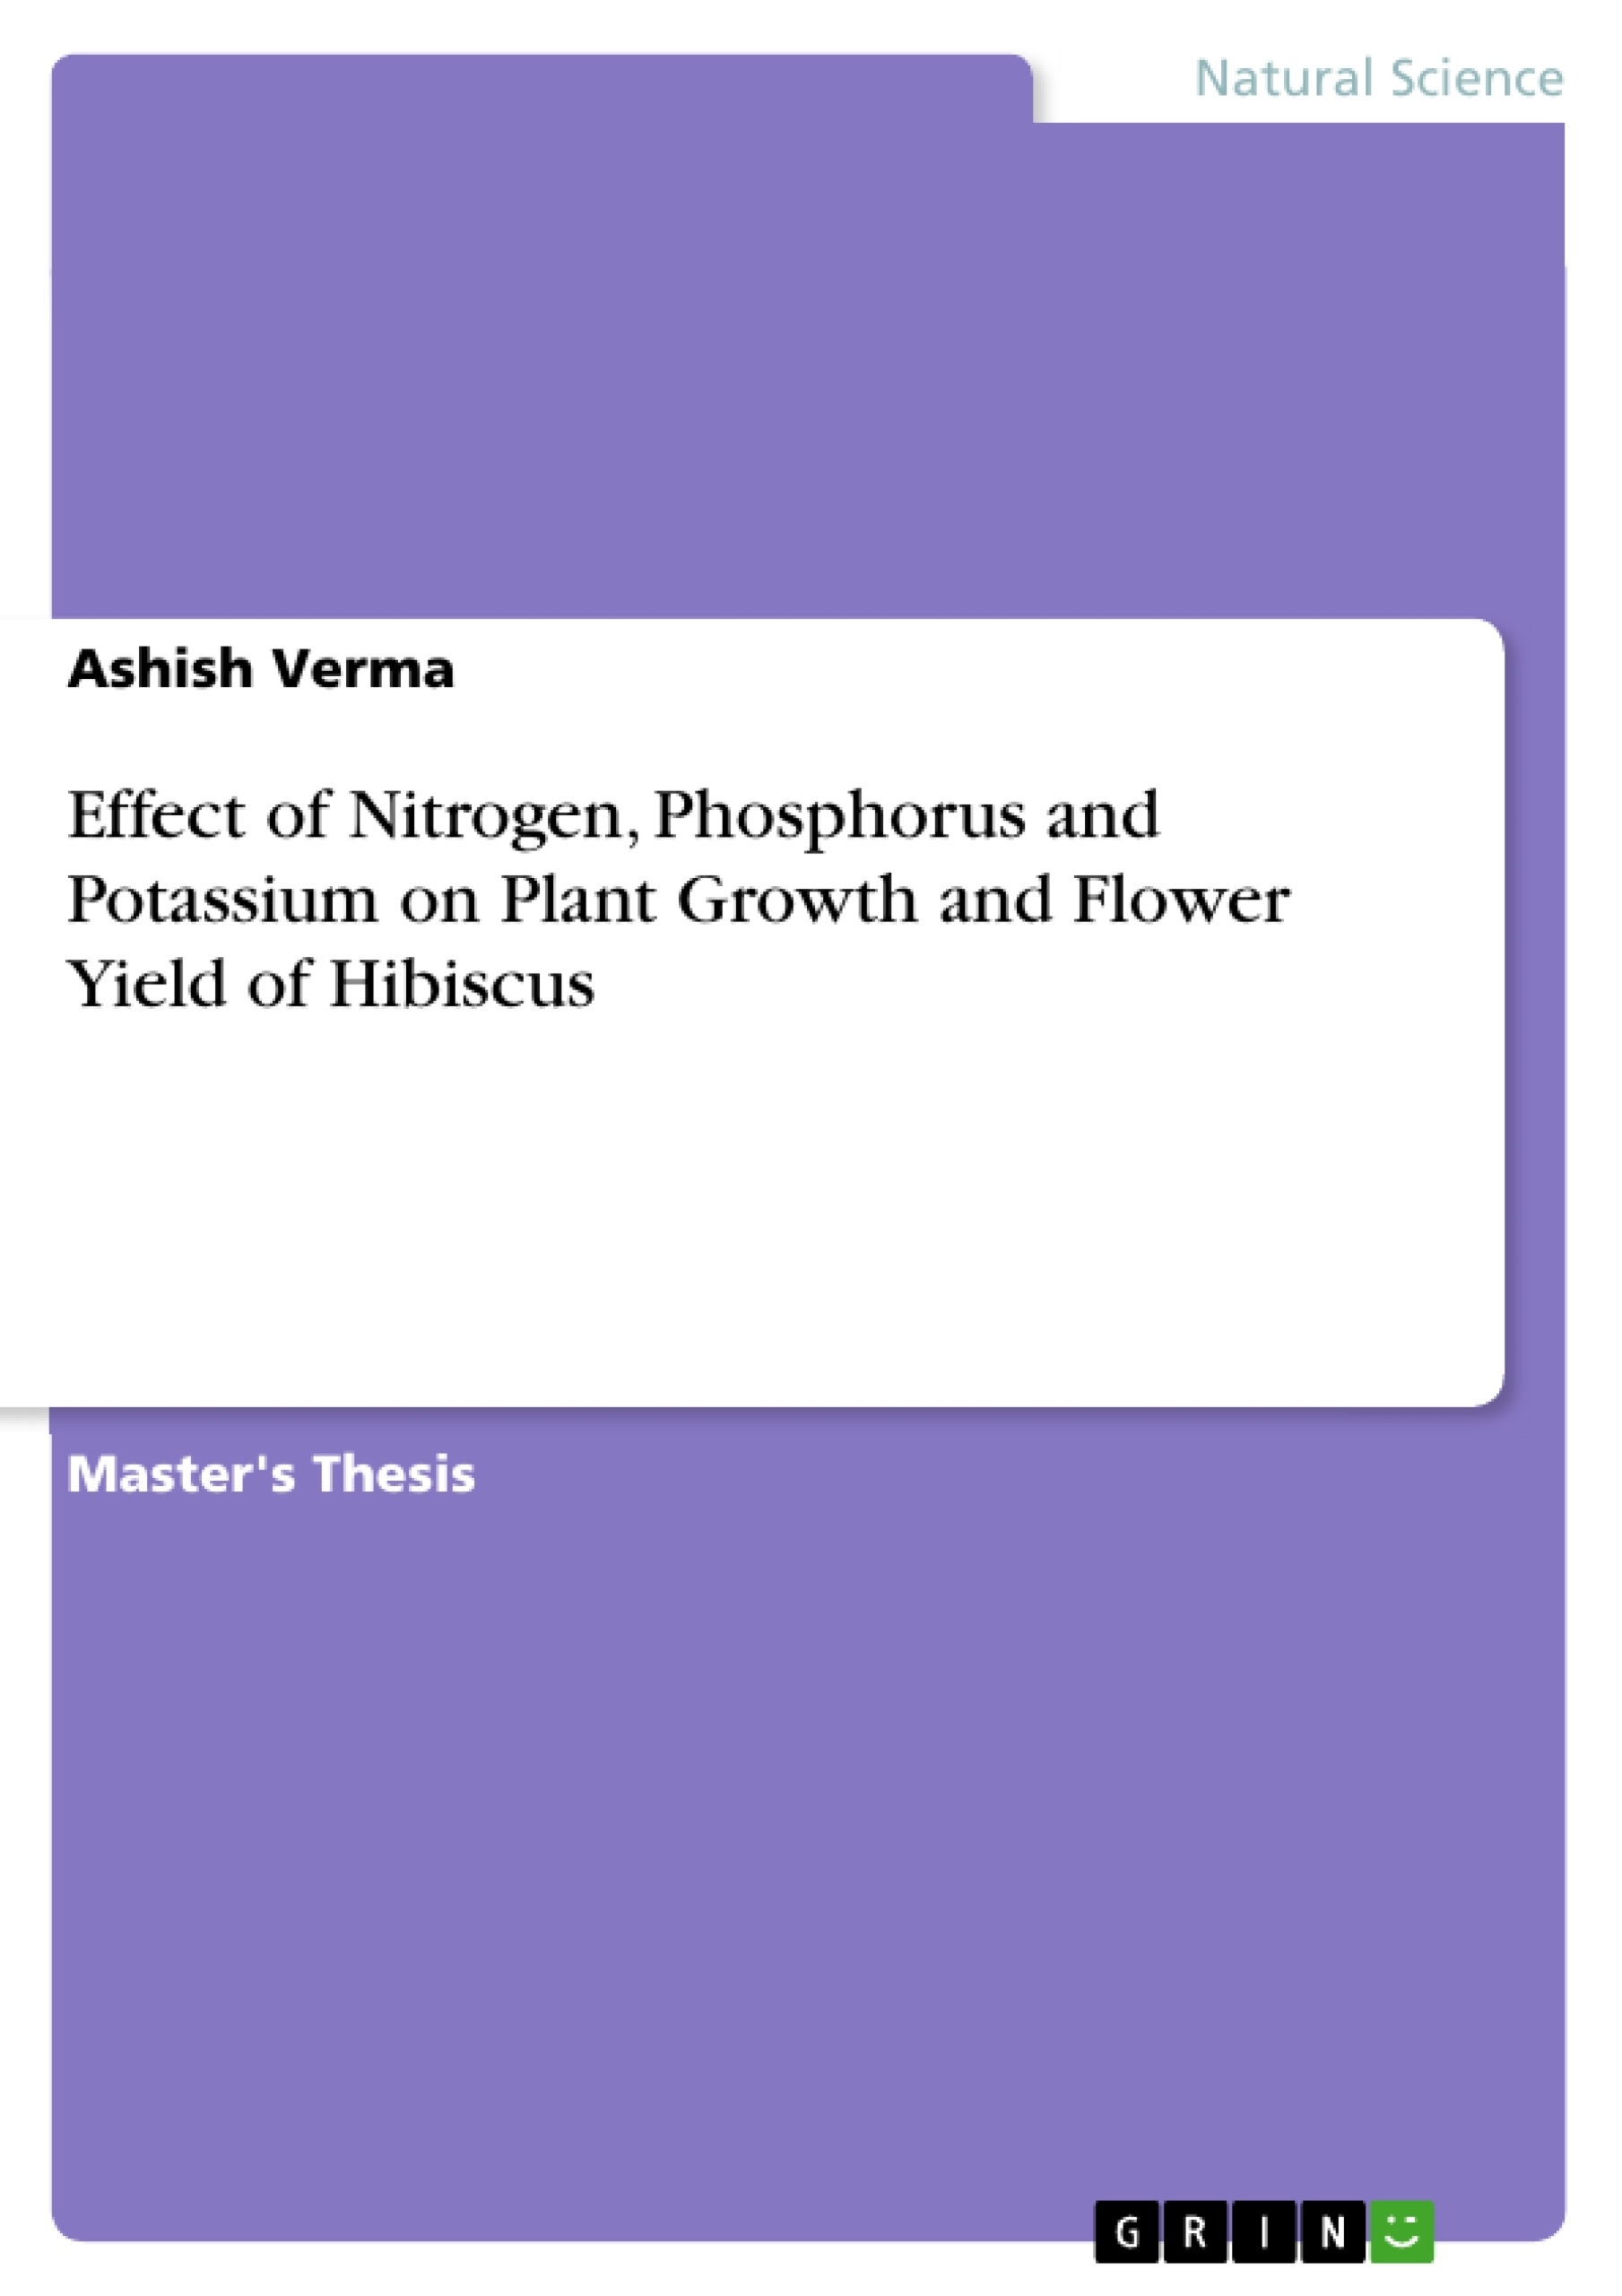 Title: Effect of Nitrogen, Phosphorus and Potassium on Plant Growth and Flower Yield of Hibiscus